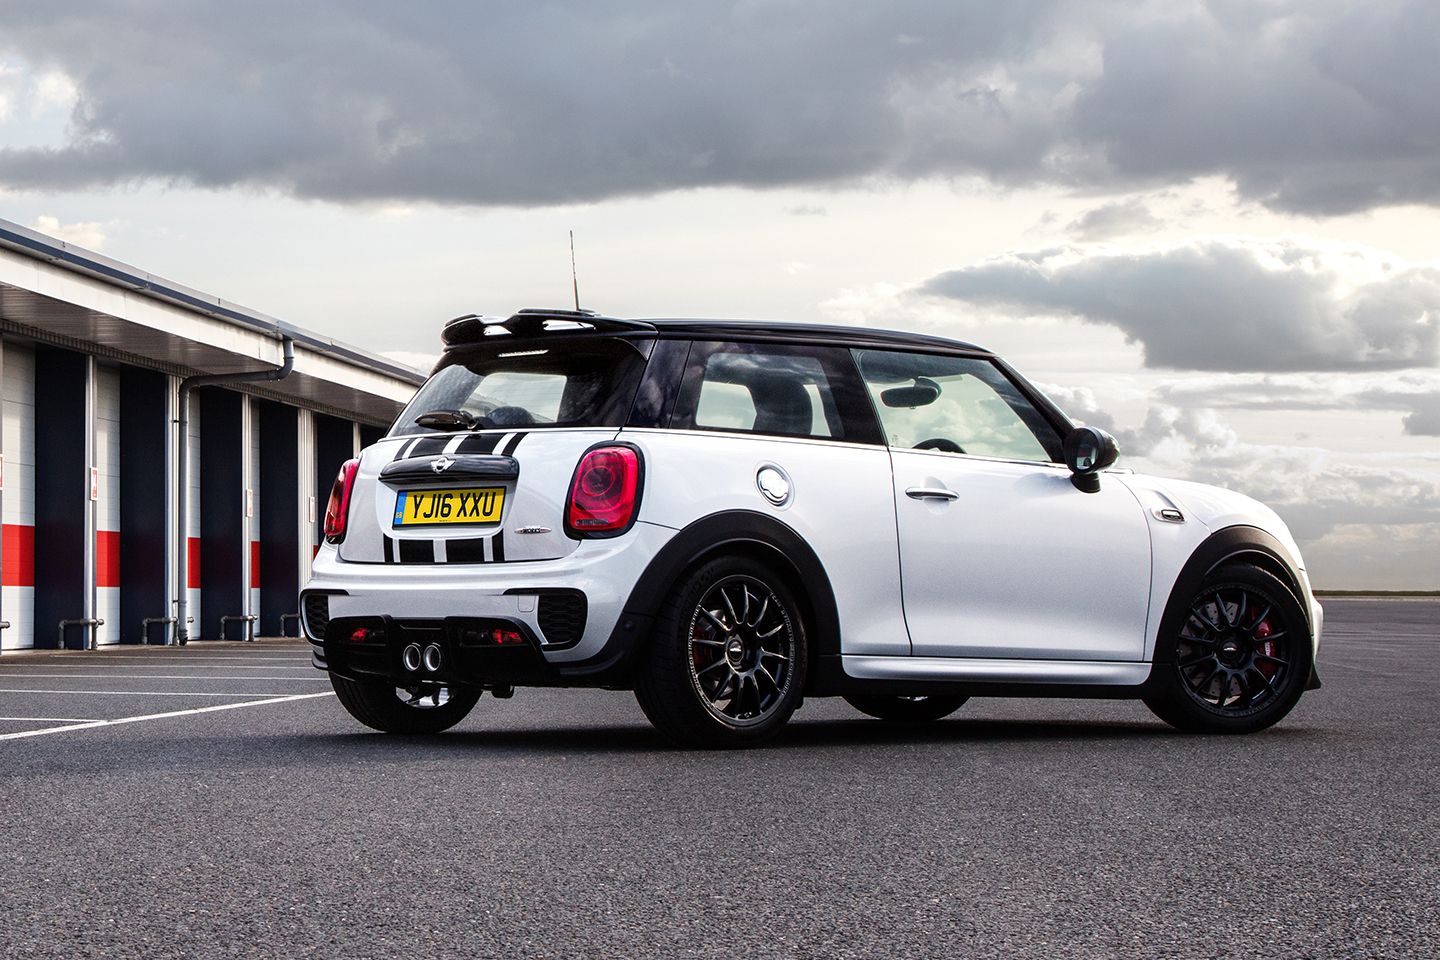 Mini Can't Build Manual Transmission-Equipped Cars Right Now - CNET